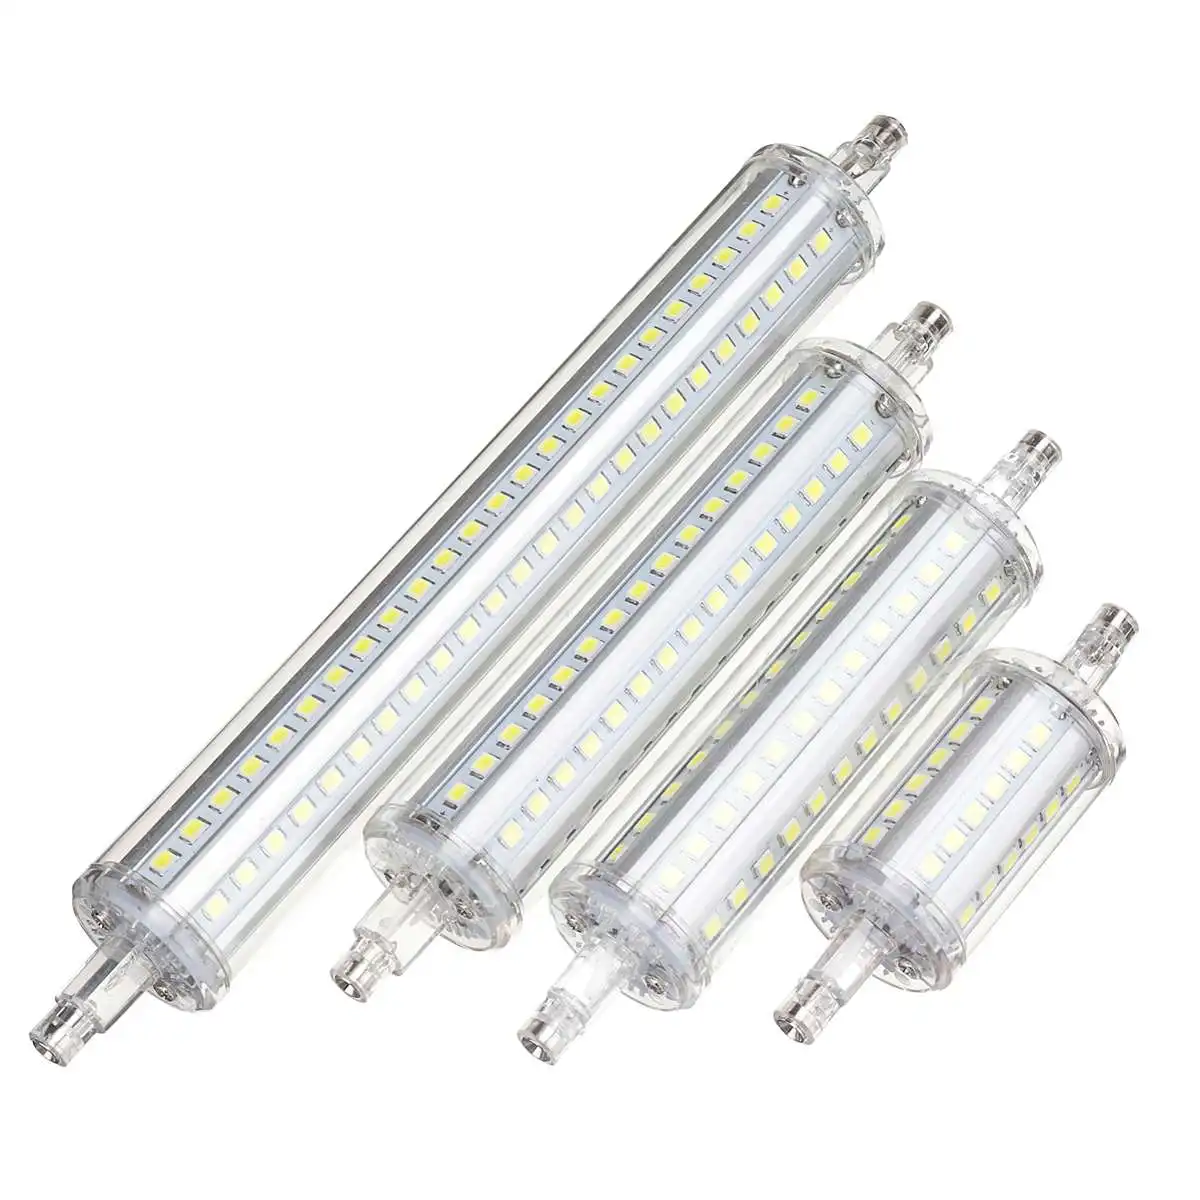 

85-265V Dimmable R7S LED Corn 78mm 118mm 135mm 189mm Light 2835 SMD Bulb 5W 10W 12W 15W Replace Halogen Lamp Bombillas